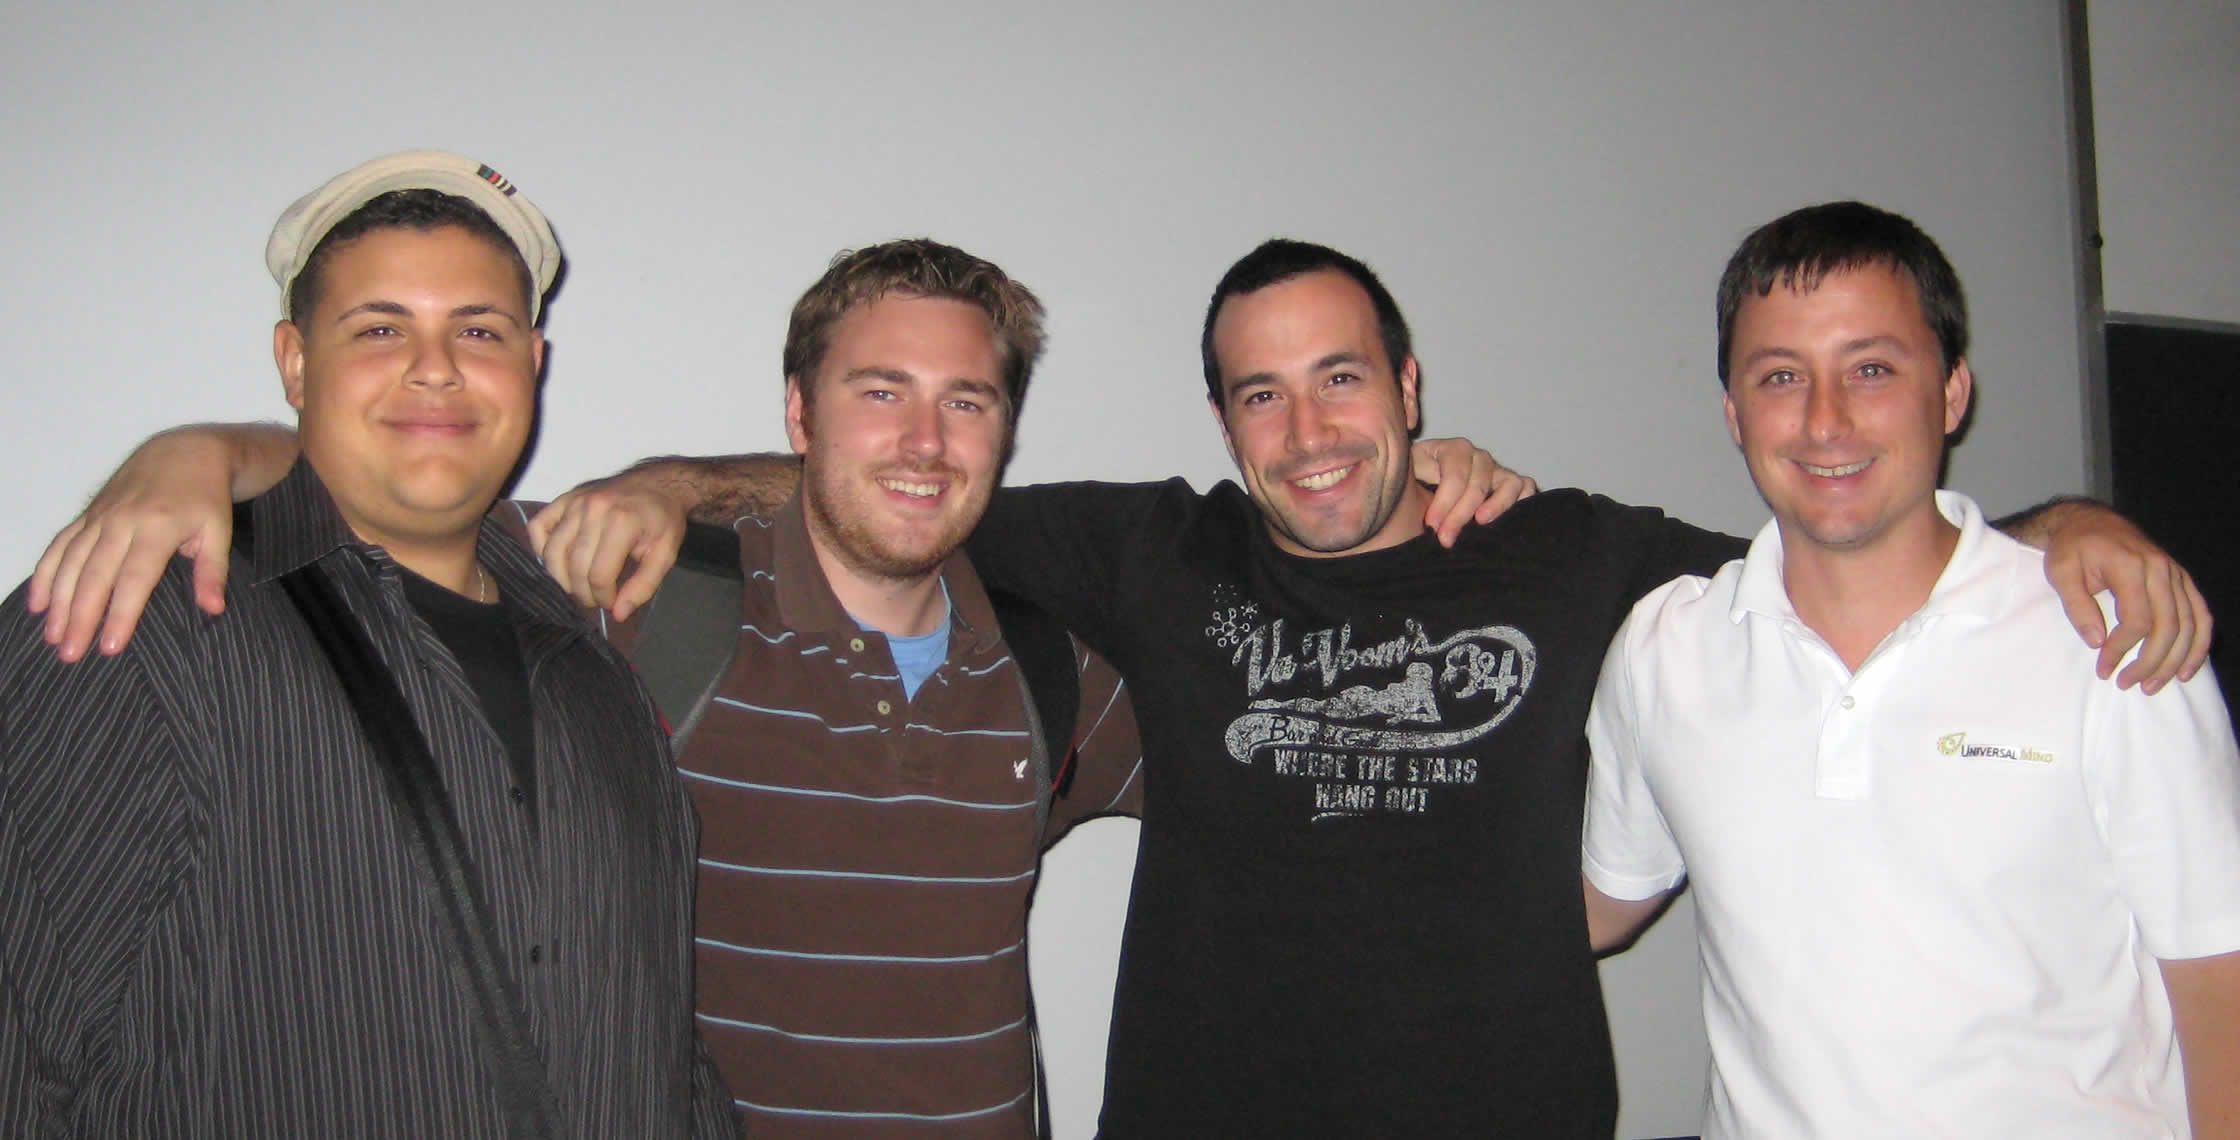 Ben Nadel at the New York ColdFusion User Group (Jul. 2008) with: Clark Valberg, Simon Free, and Dan Wilson